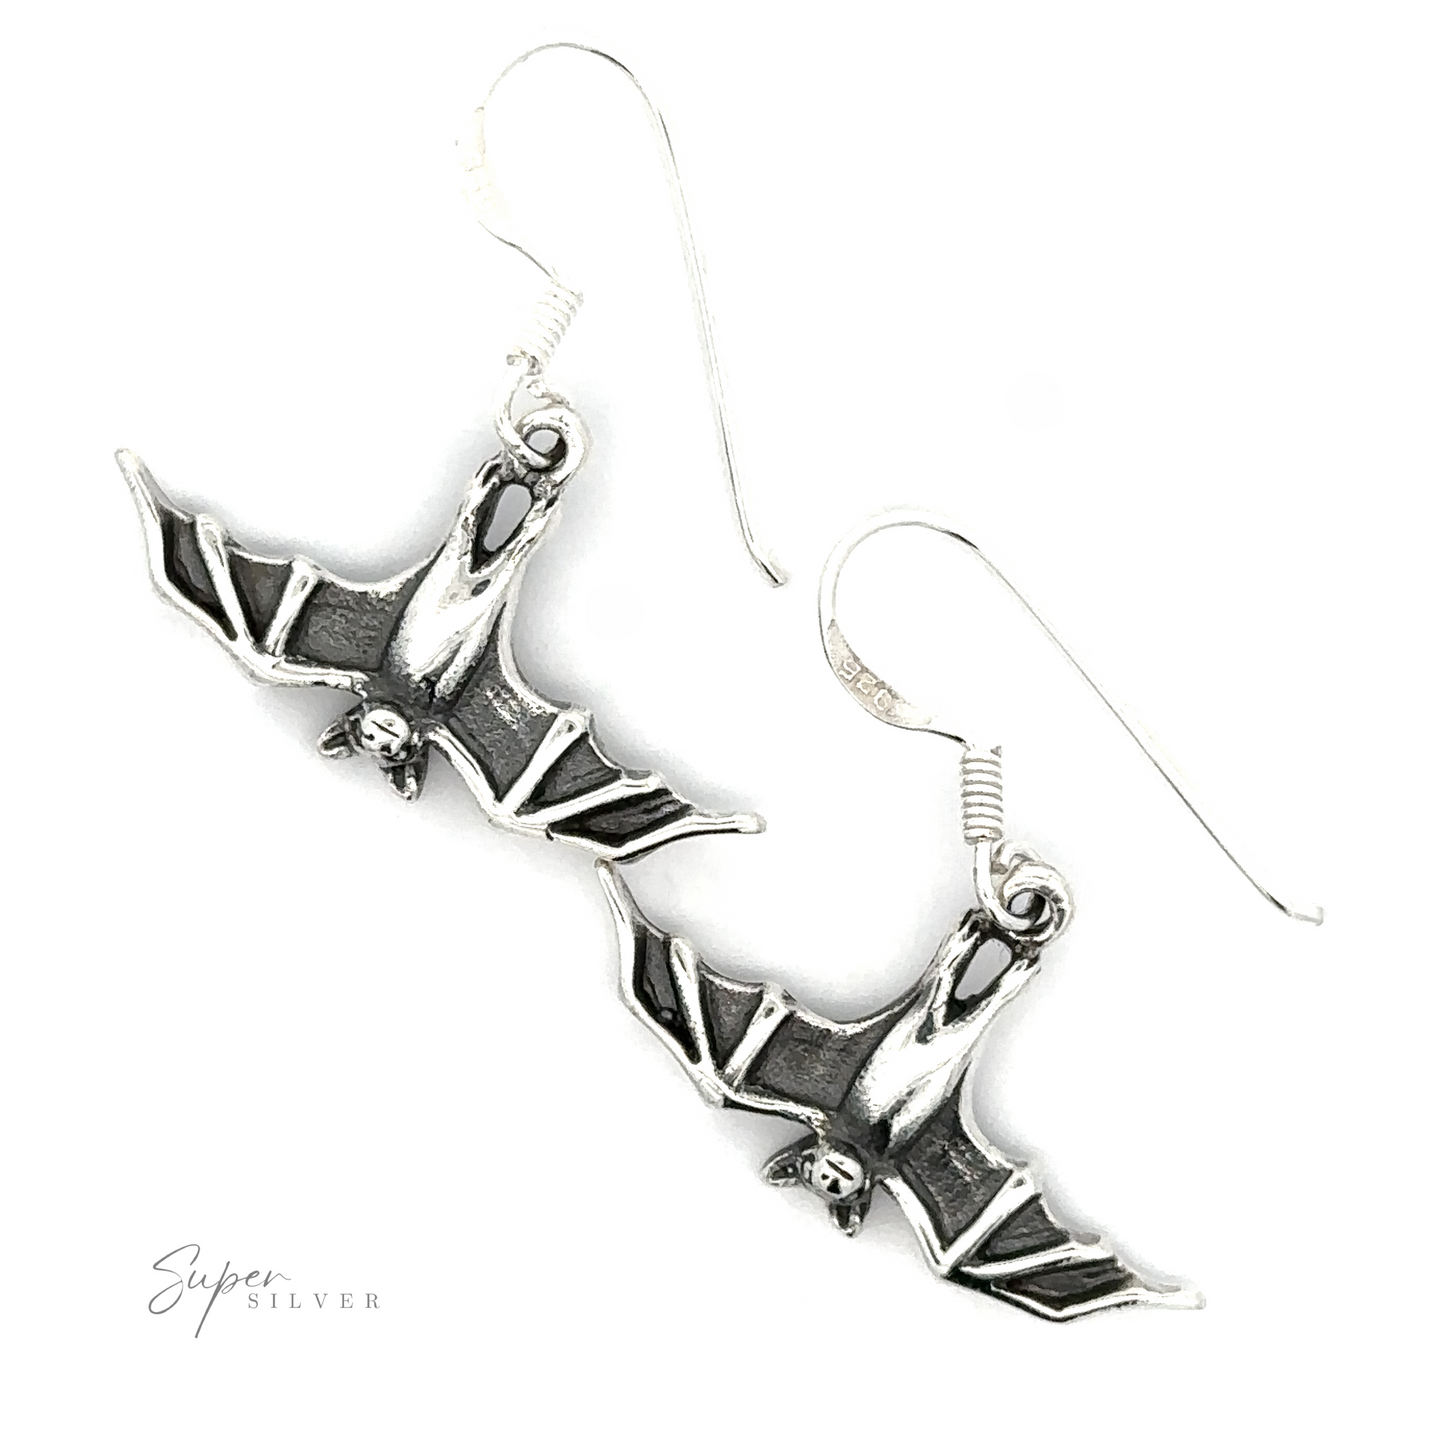 A pair of silver Hanging Bat Earrings displayed against a white background.